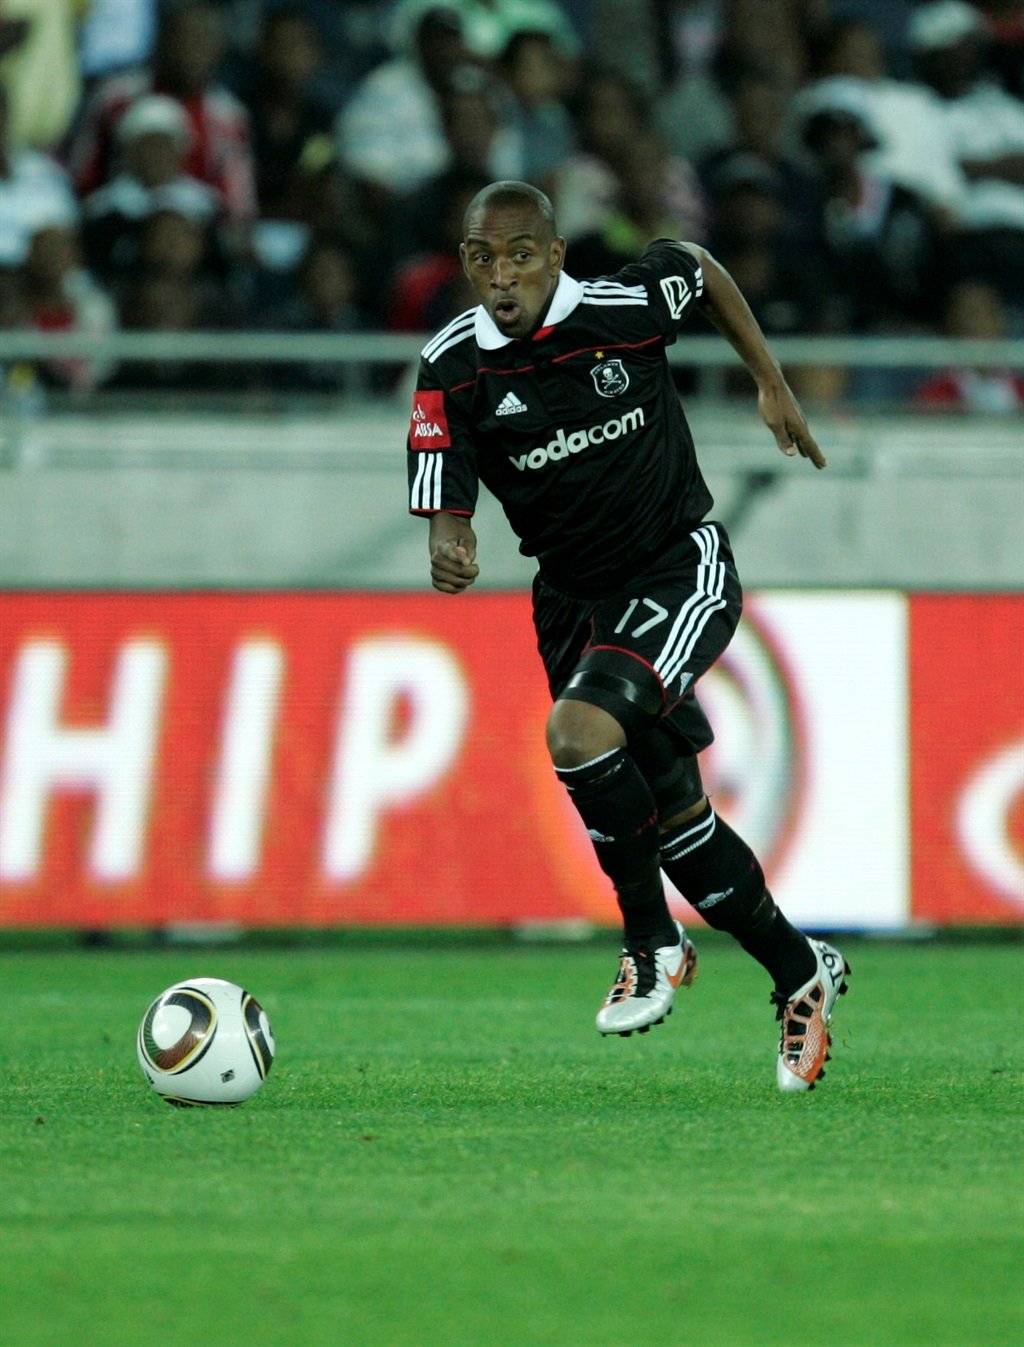 SOWETO, SOUTH AFRICA - OCTOBER 30, Patrick Malokase of Pirates during the Absa Premiership match between Orlando Pirates and Ajax Cape Town at Orlando Stadium on October 30, 2010 in Soweto, South Africa..Photo by Dominic Barnardt / Gallo Images